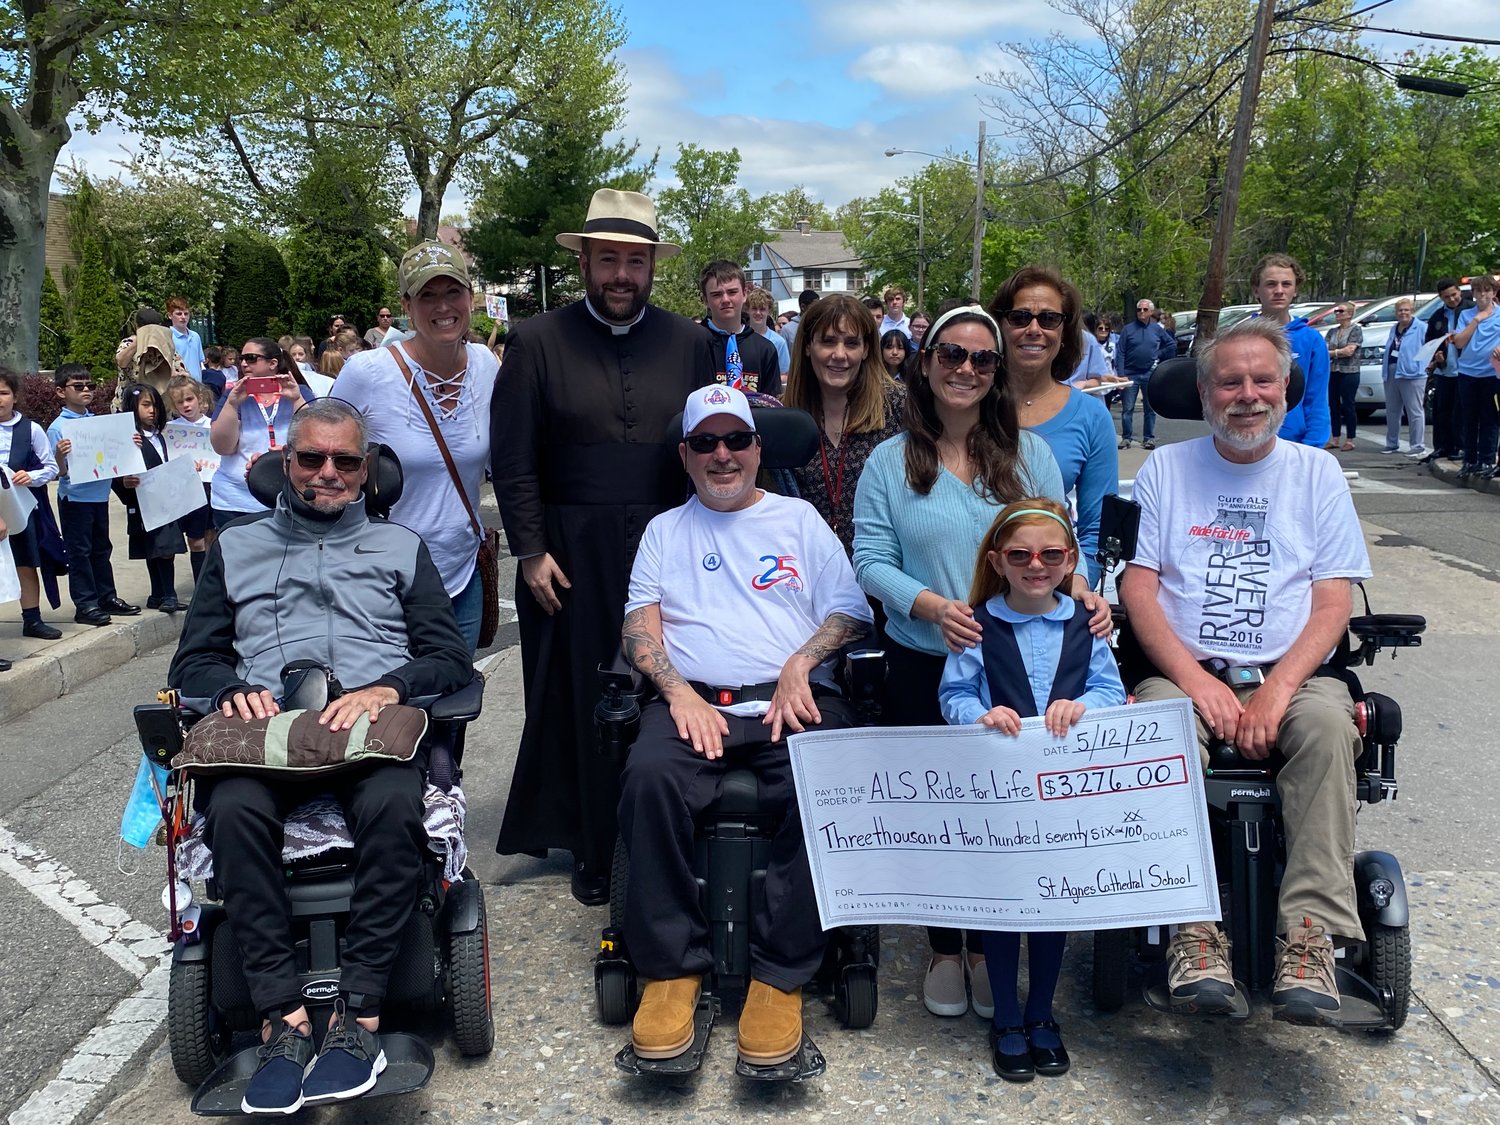 St. Agnes representatives presented the ALS Ride for Life with a check. Accepting were, from left, John Michael, Colleen Whaley, the Rev. Michael Duffy, Joe Cullum, Cecilia St. John, Alana Rollandie, her daughter, Addison Giarrizzo, Toni Lee Rollandie and Paul Weisman.